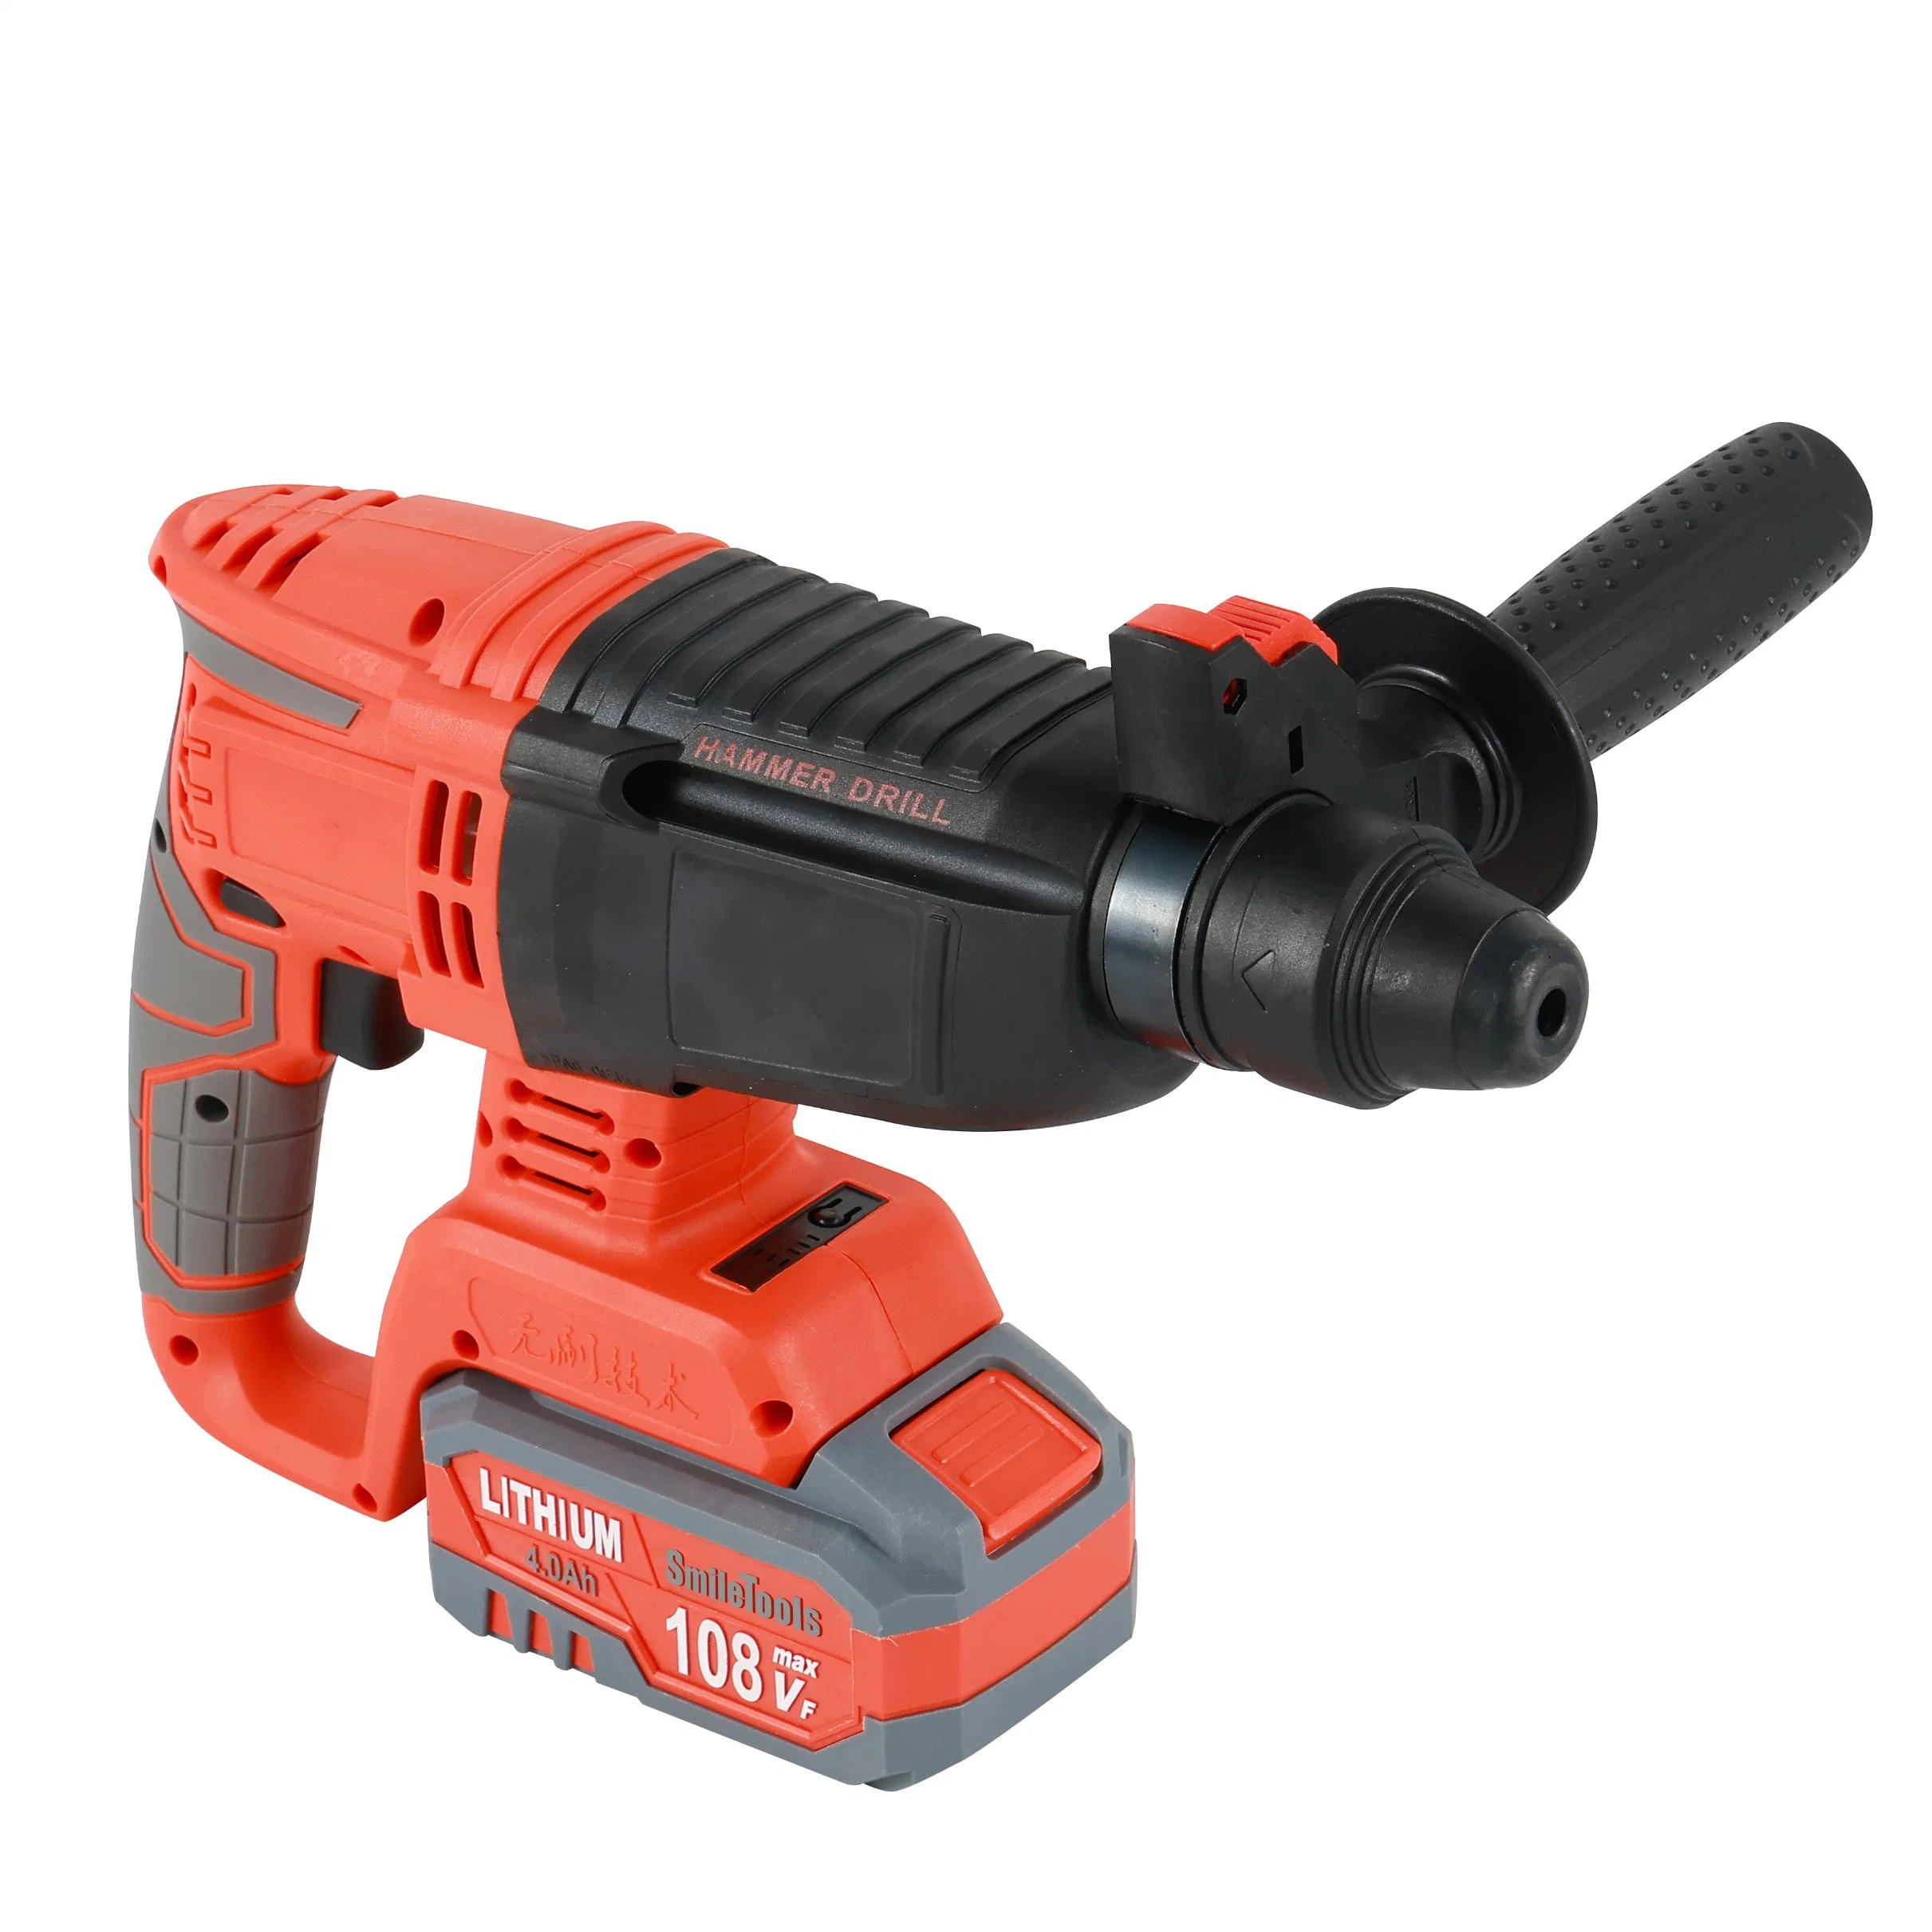 Best Selling Drills Professional Electric Handheld Rotary Power Hammer Drill Power Tools Drills Set Impact Machine